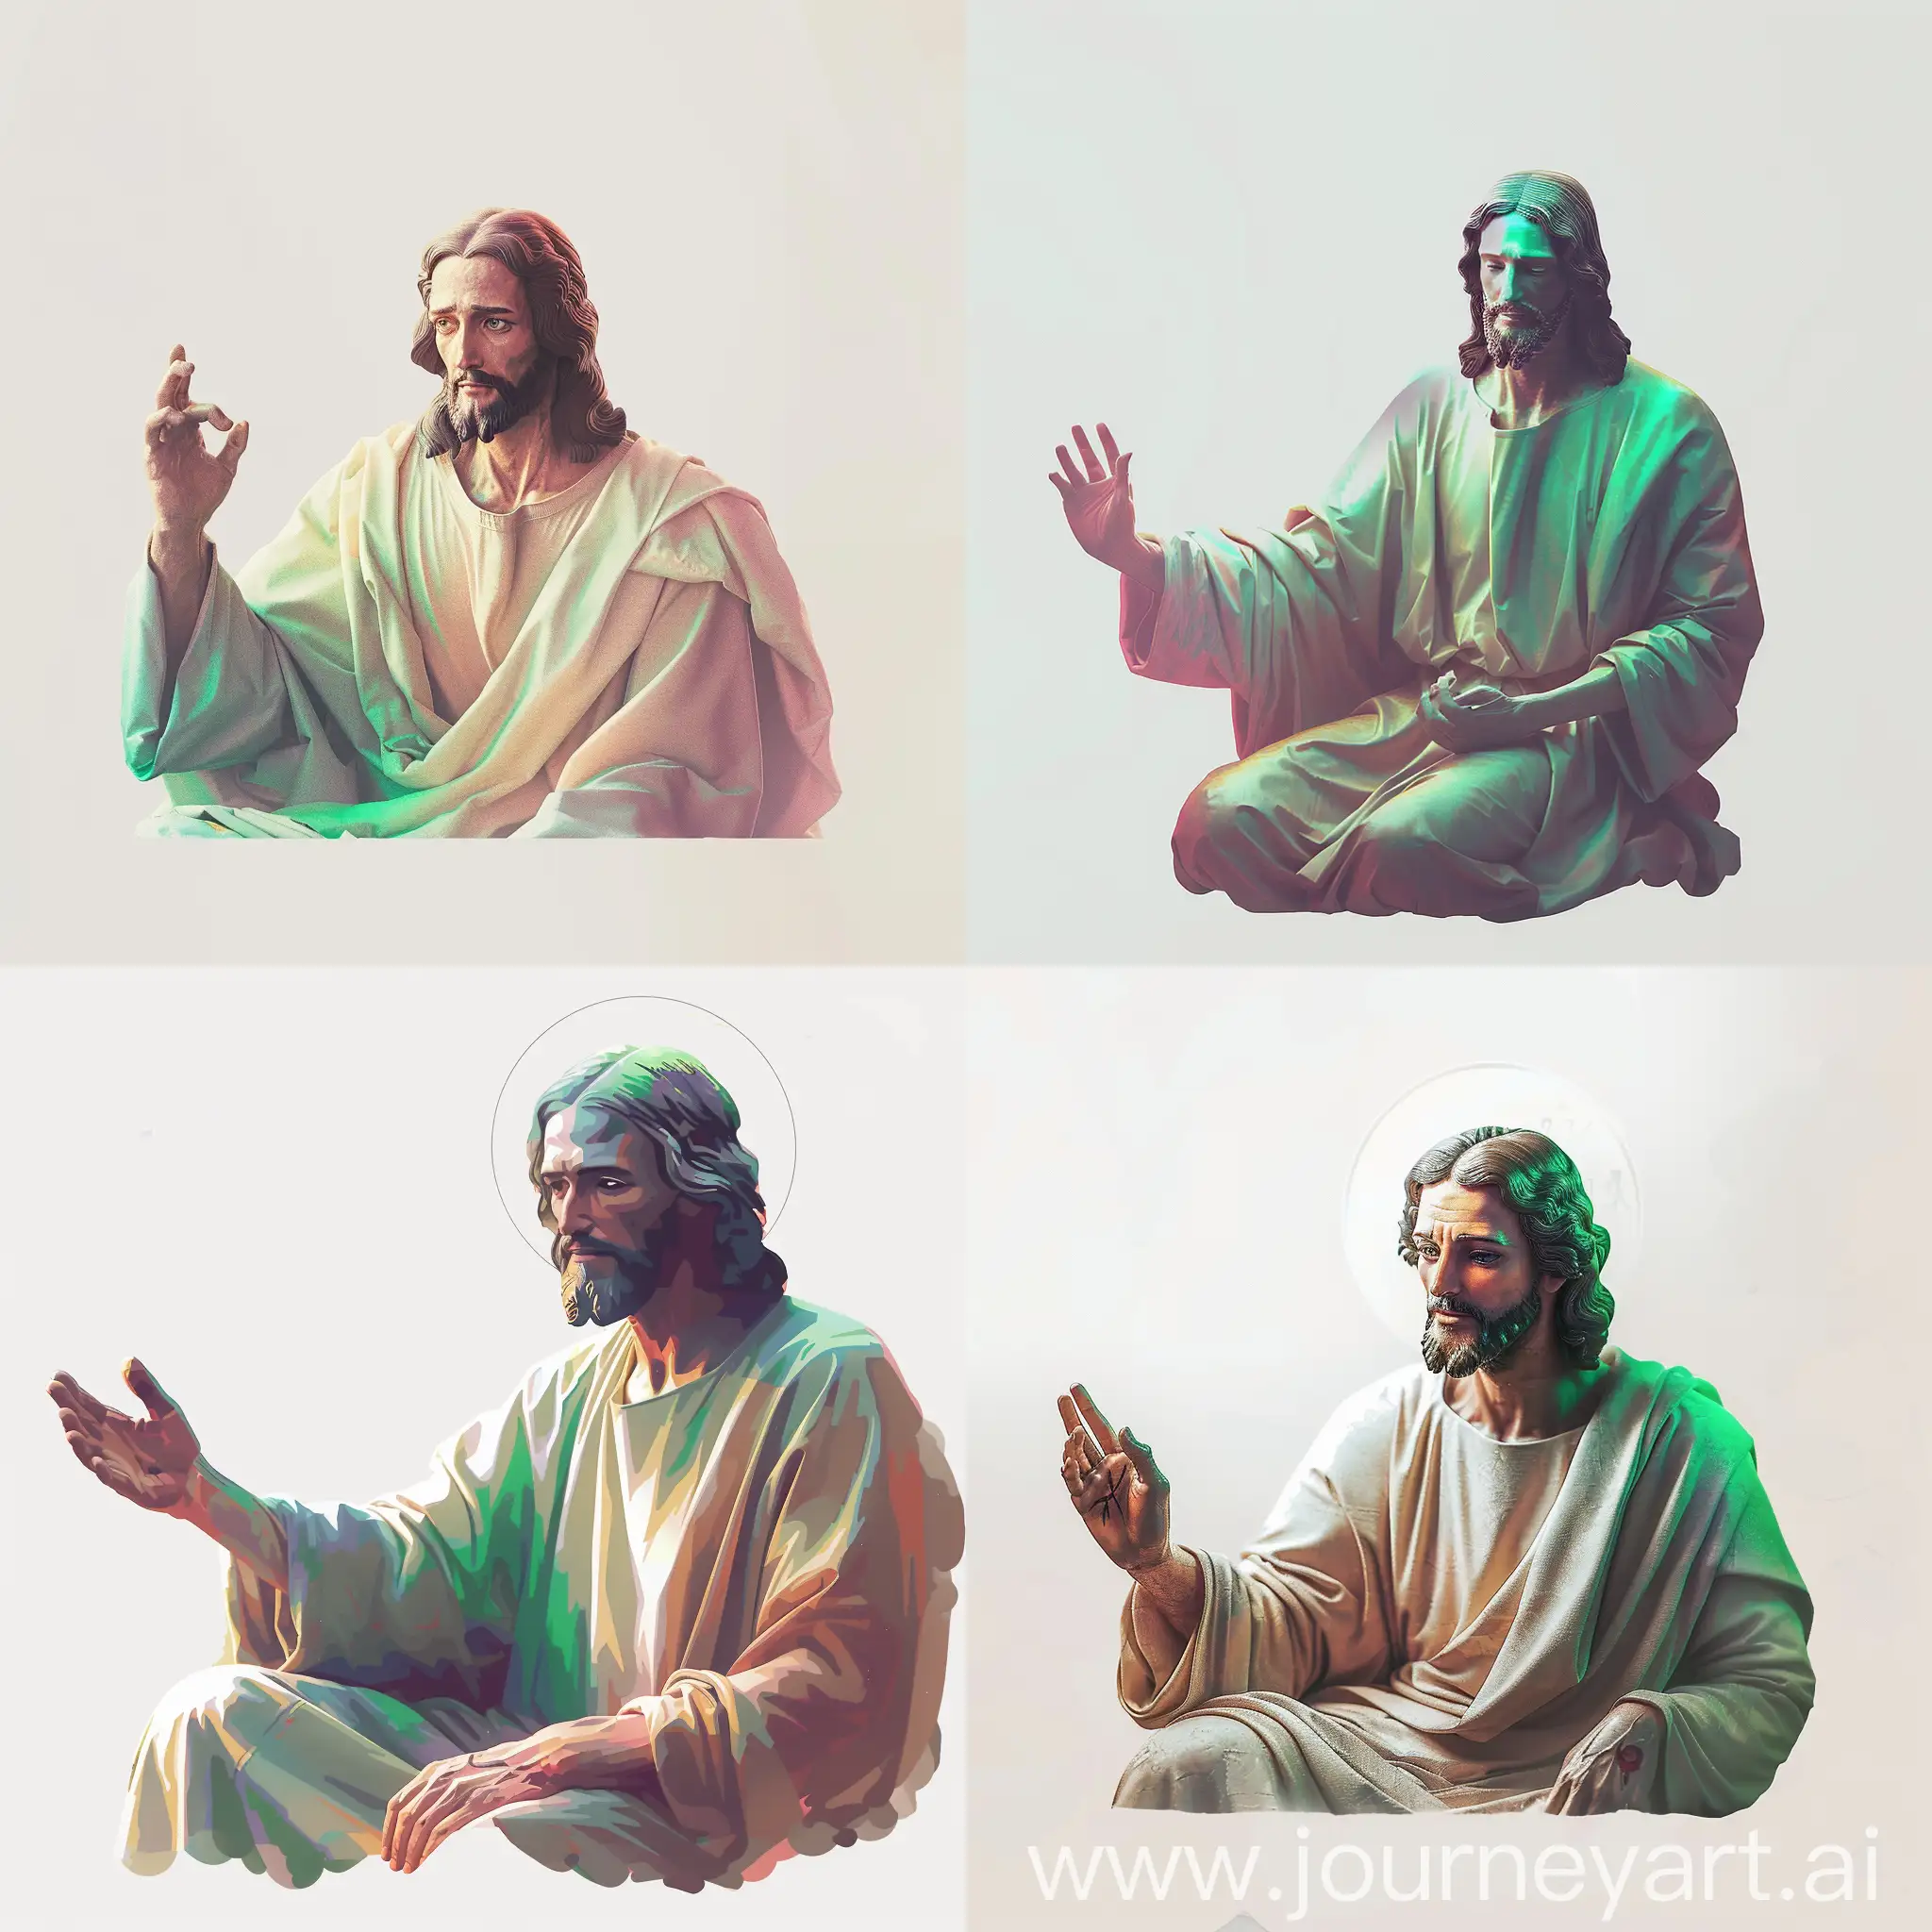 https://www.divino.ai/_next/static/media/f5QKz6MN3228572Wie8Transformed2Png.4d22ead1.png The overall color palette should consist of soft hues with white (#FFFFFF) background and no corners.

The figure of Jesus Christ, stylized yet identifiable, is placed on the center of the image. He is seated comfortably, dressed in a simple robe filled with calming, earthy tones.  Nobody else can be seen.

Instead of a distant gaze, let's bring the viewer closer. Jesus' face should be larger, implying a closer proximity to the viewer. His eyes, kind and wise, meet the viewer's, establishing a direct connection and inviting a personal dialogue.

His face is gently bathed in soft, warm light that subtly forms a halo around his head, creating an aura of divine serenity. His facial expression is peaceful and understanding, reflecting an empathetic listener and a caring therapist.

To reinforce this closer look, let's add a detail - perhaps a hand raised in a calming gesture, indicating his intent to guide and soothe.

In essence, this image becomes an intimate, stylized portrayal of Jesus Christ as a therapist, emphasizing his empathetic nature and offering a sense of personal connection to the viewer. 